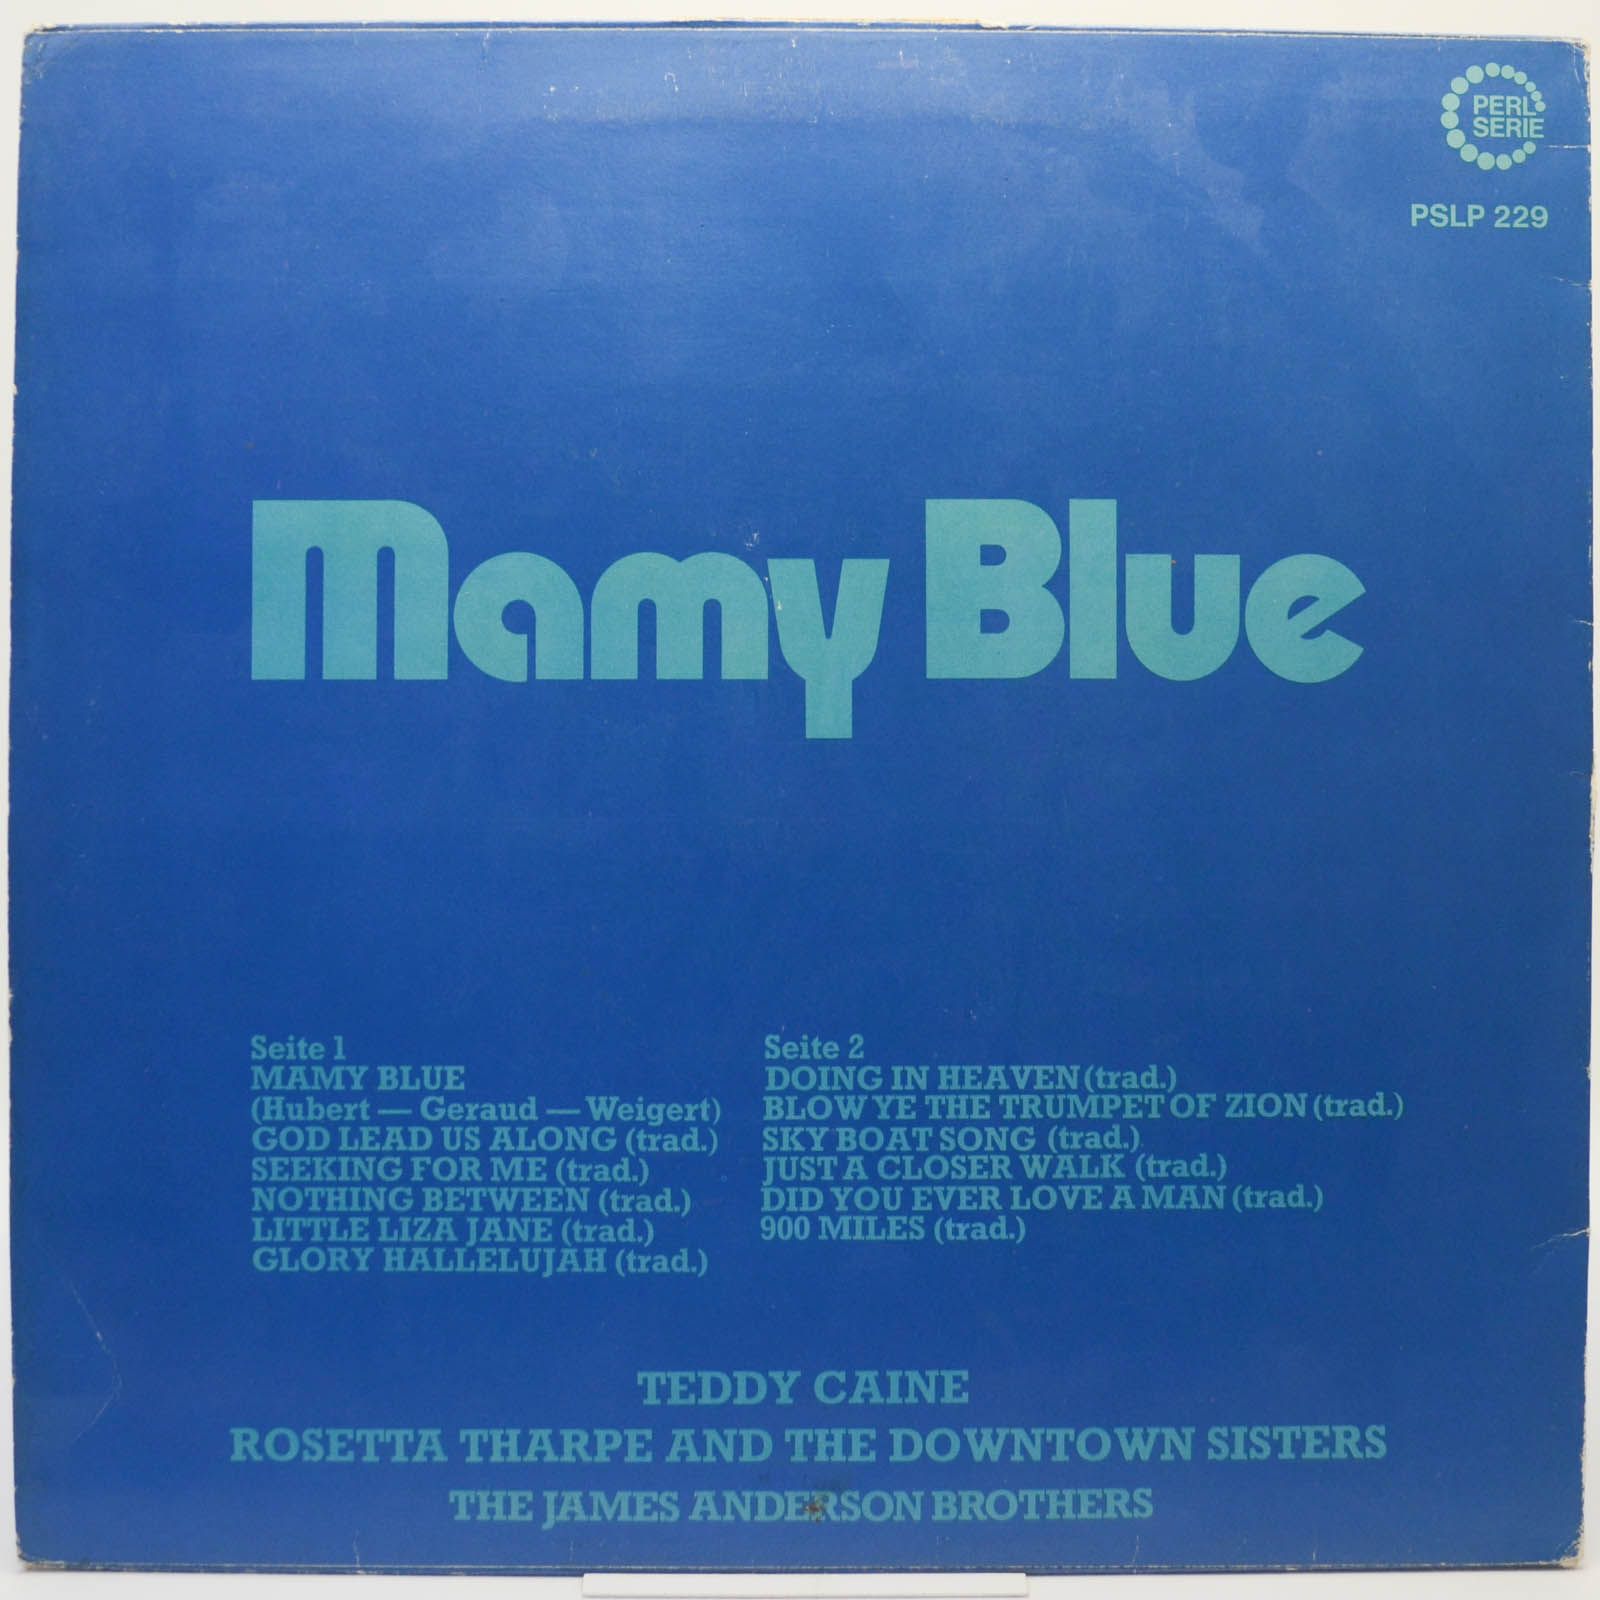 Teddy Caine / Rosetta Tharpe And The Downtown Sisters, New Heaven / The James Anderson Brothers — Mamy Blue, 1971